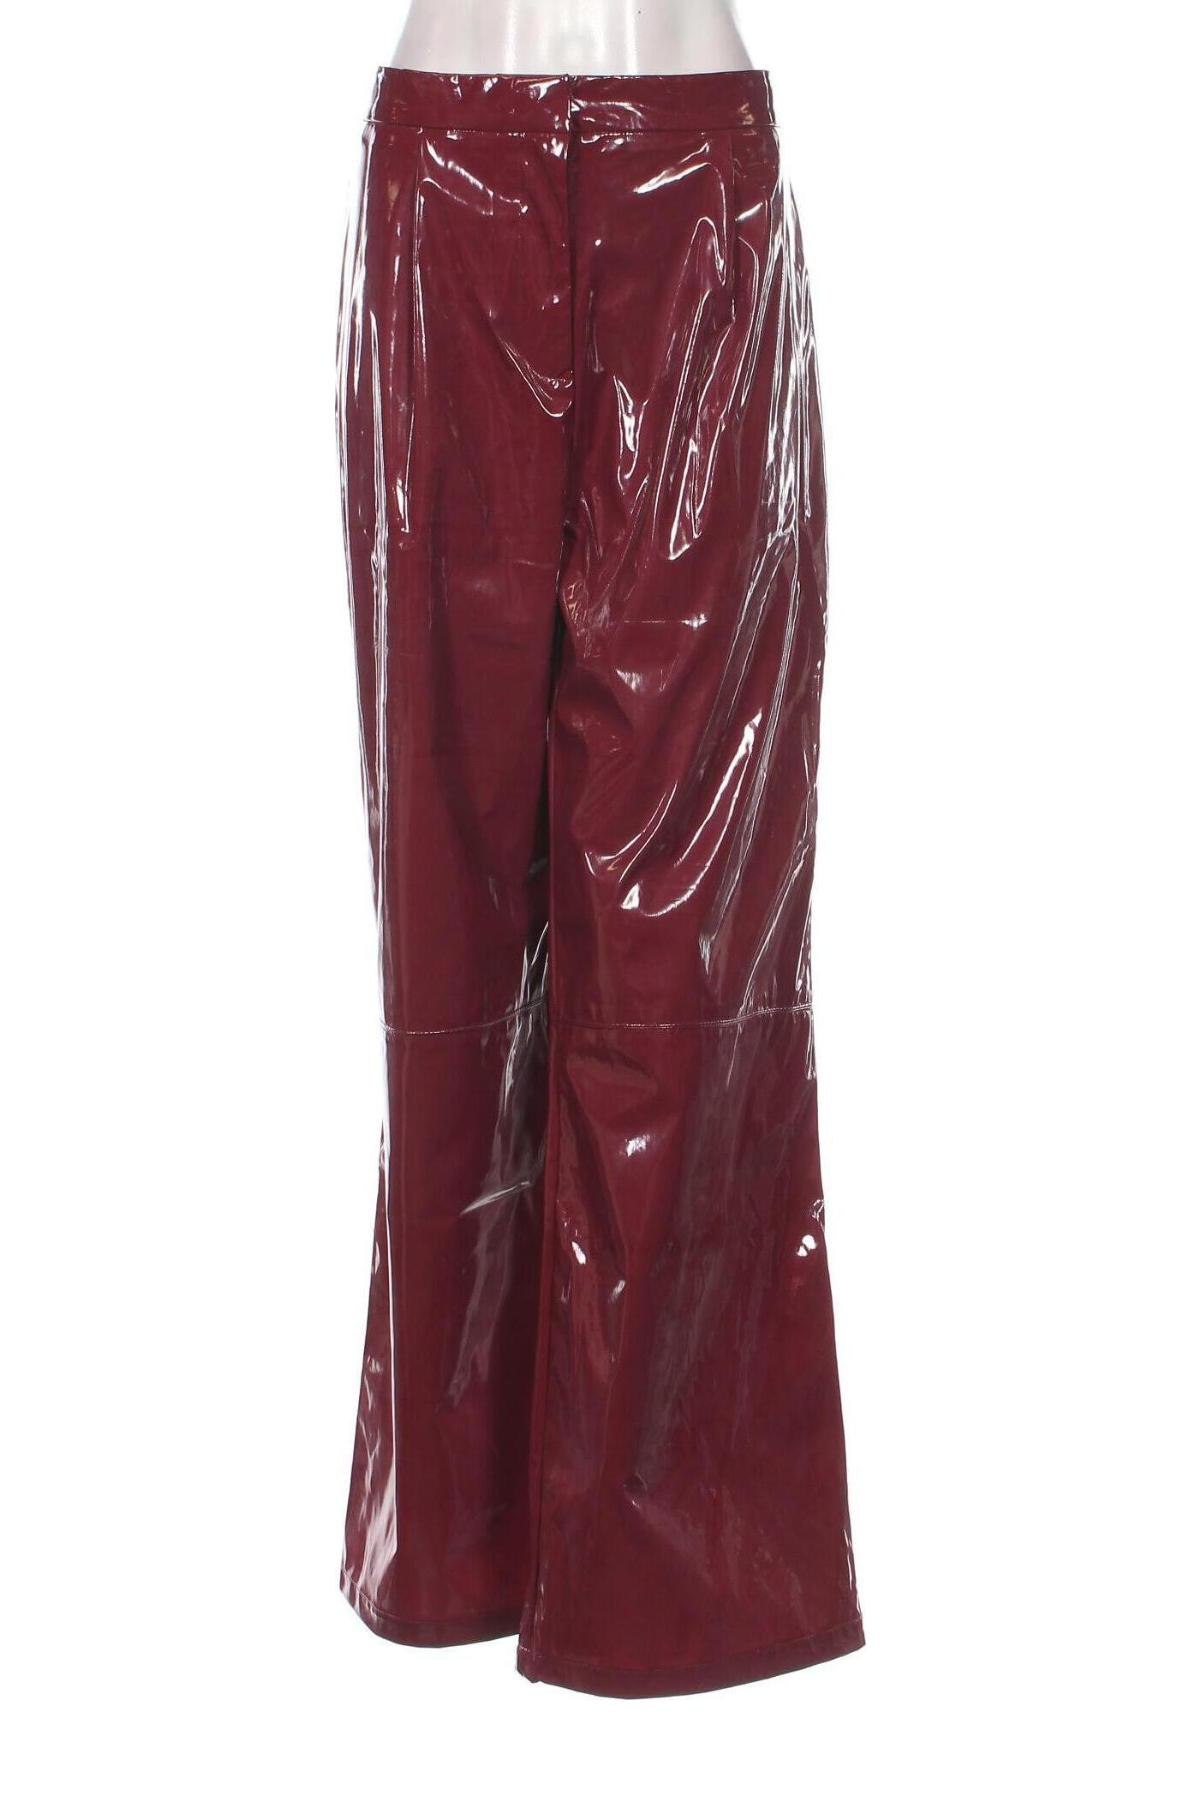 Damenhose Katy Perry exclusive for ABOUT YOU, Größe XL, Farbe Rot, Preis € 10,07